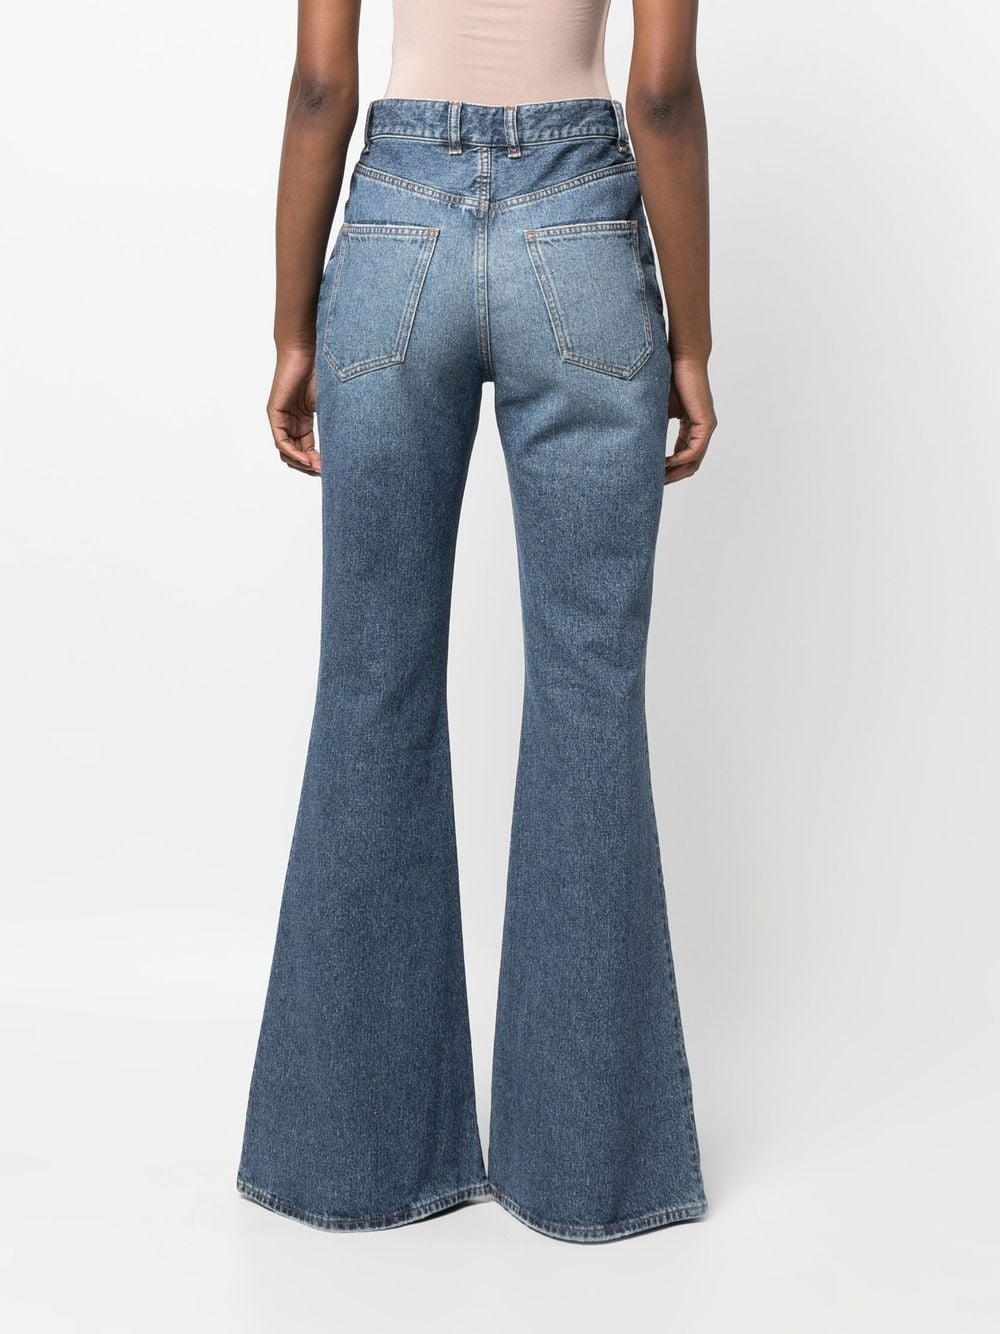 FRAME Flares & Bell Bottom Jeans for Women - Shop Now at Farfetch Canada